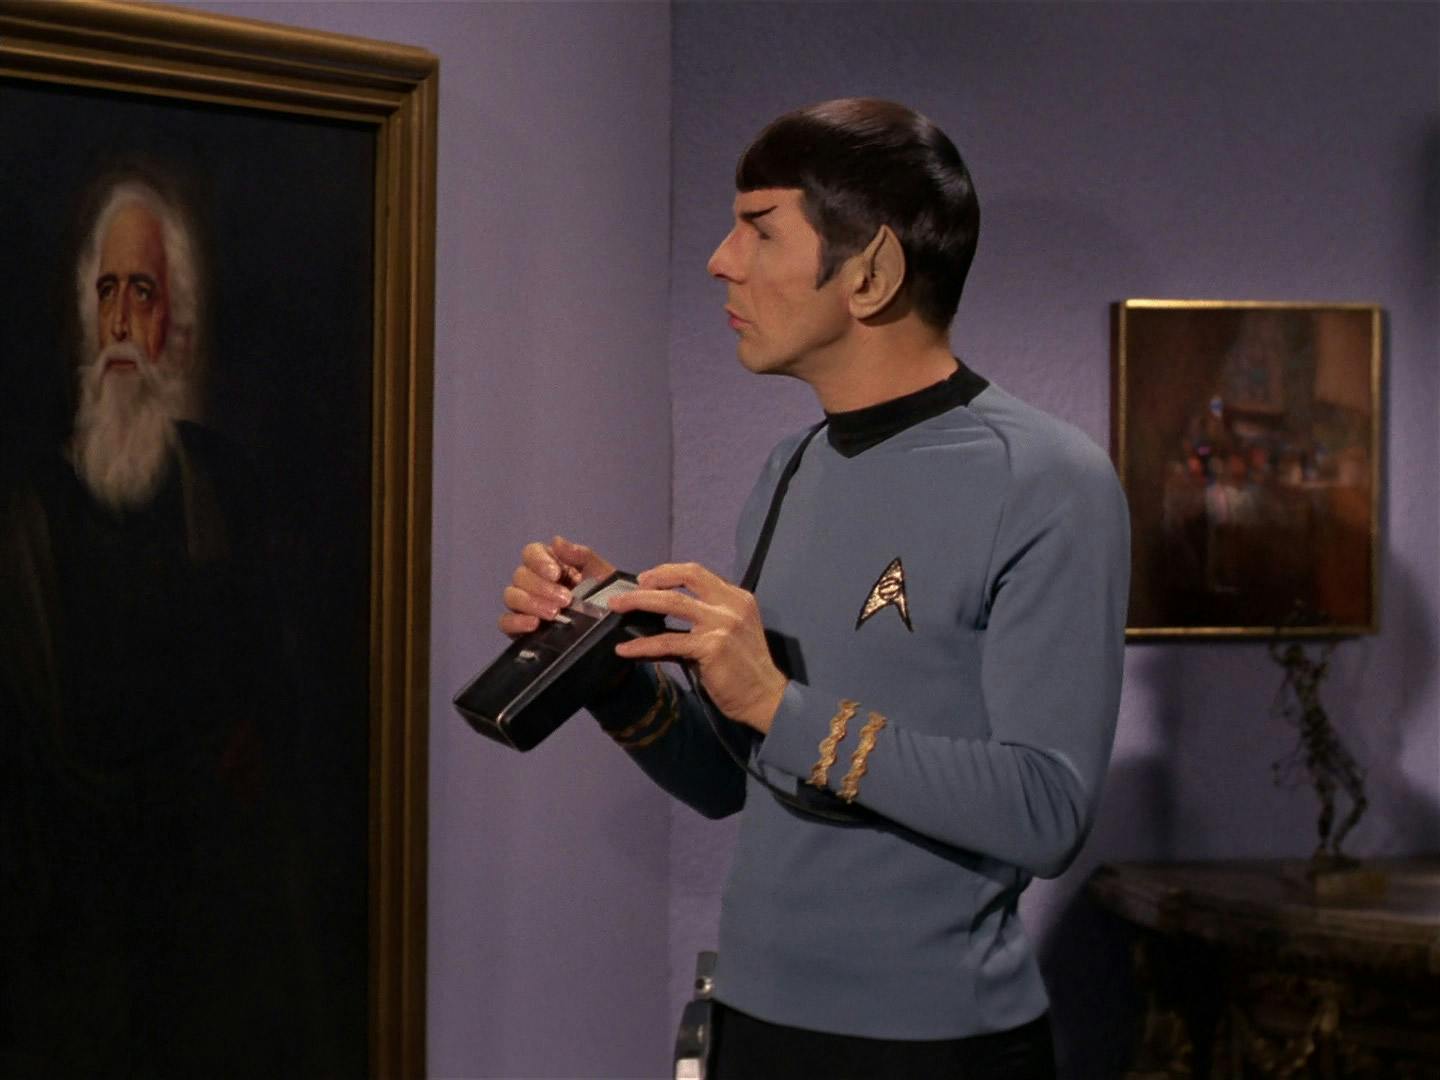 Spock lifts his tricorder while observing a painting in Flint's Gallery in 'Requiem for Methuselah'